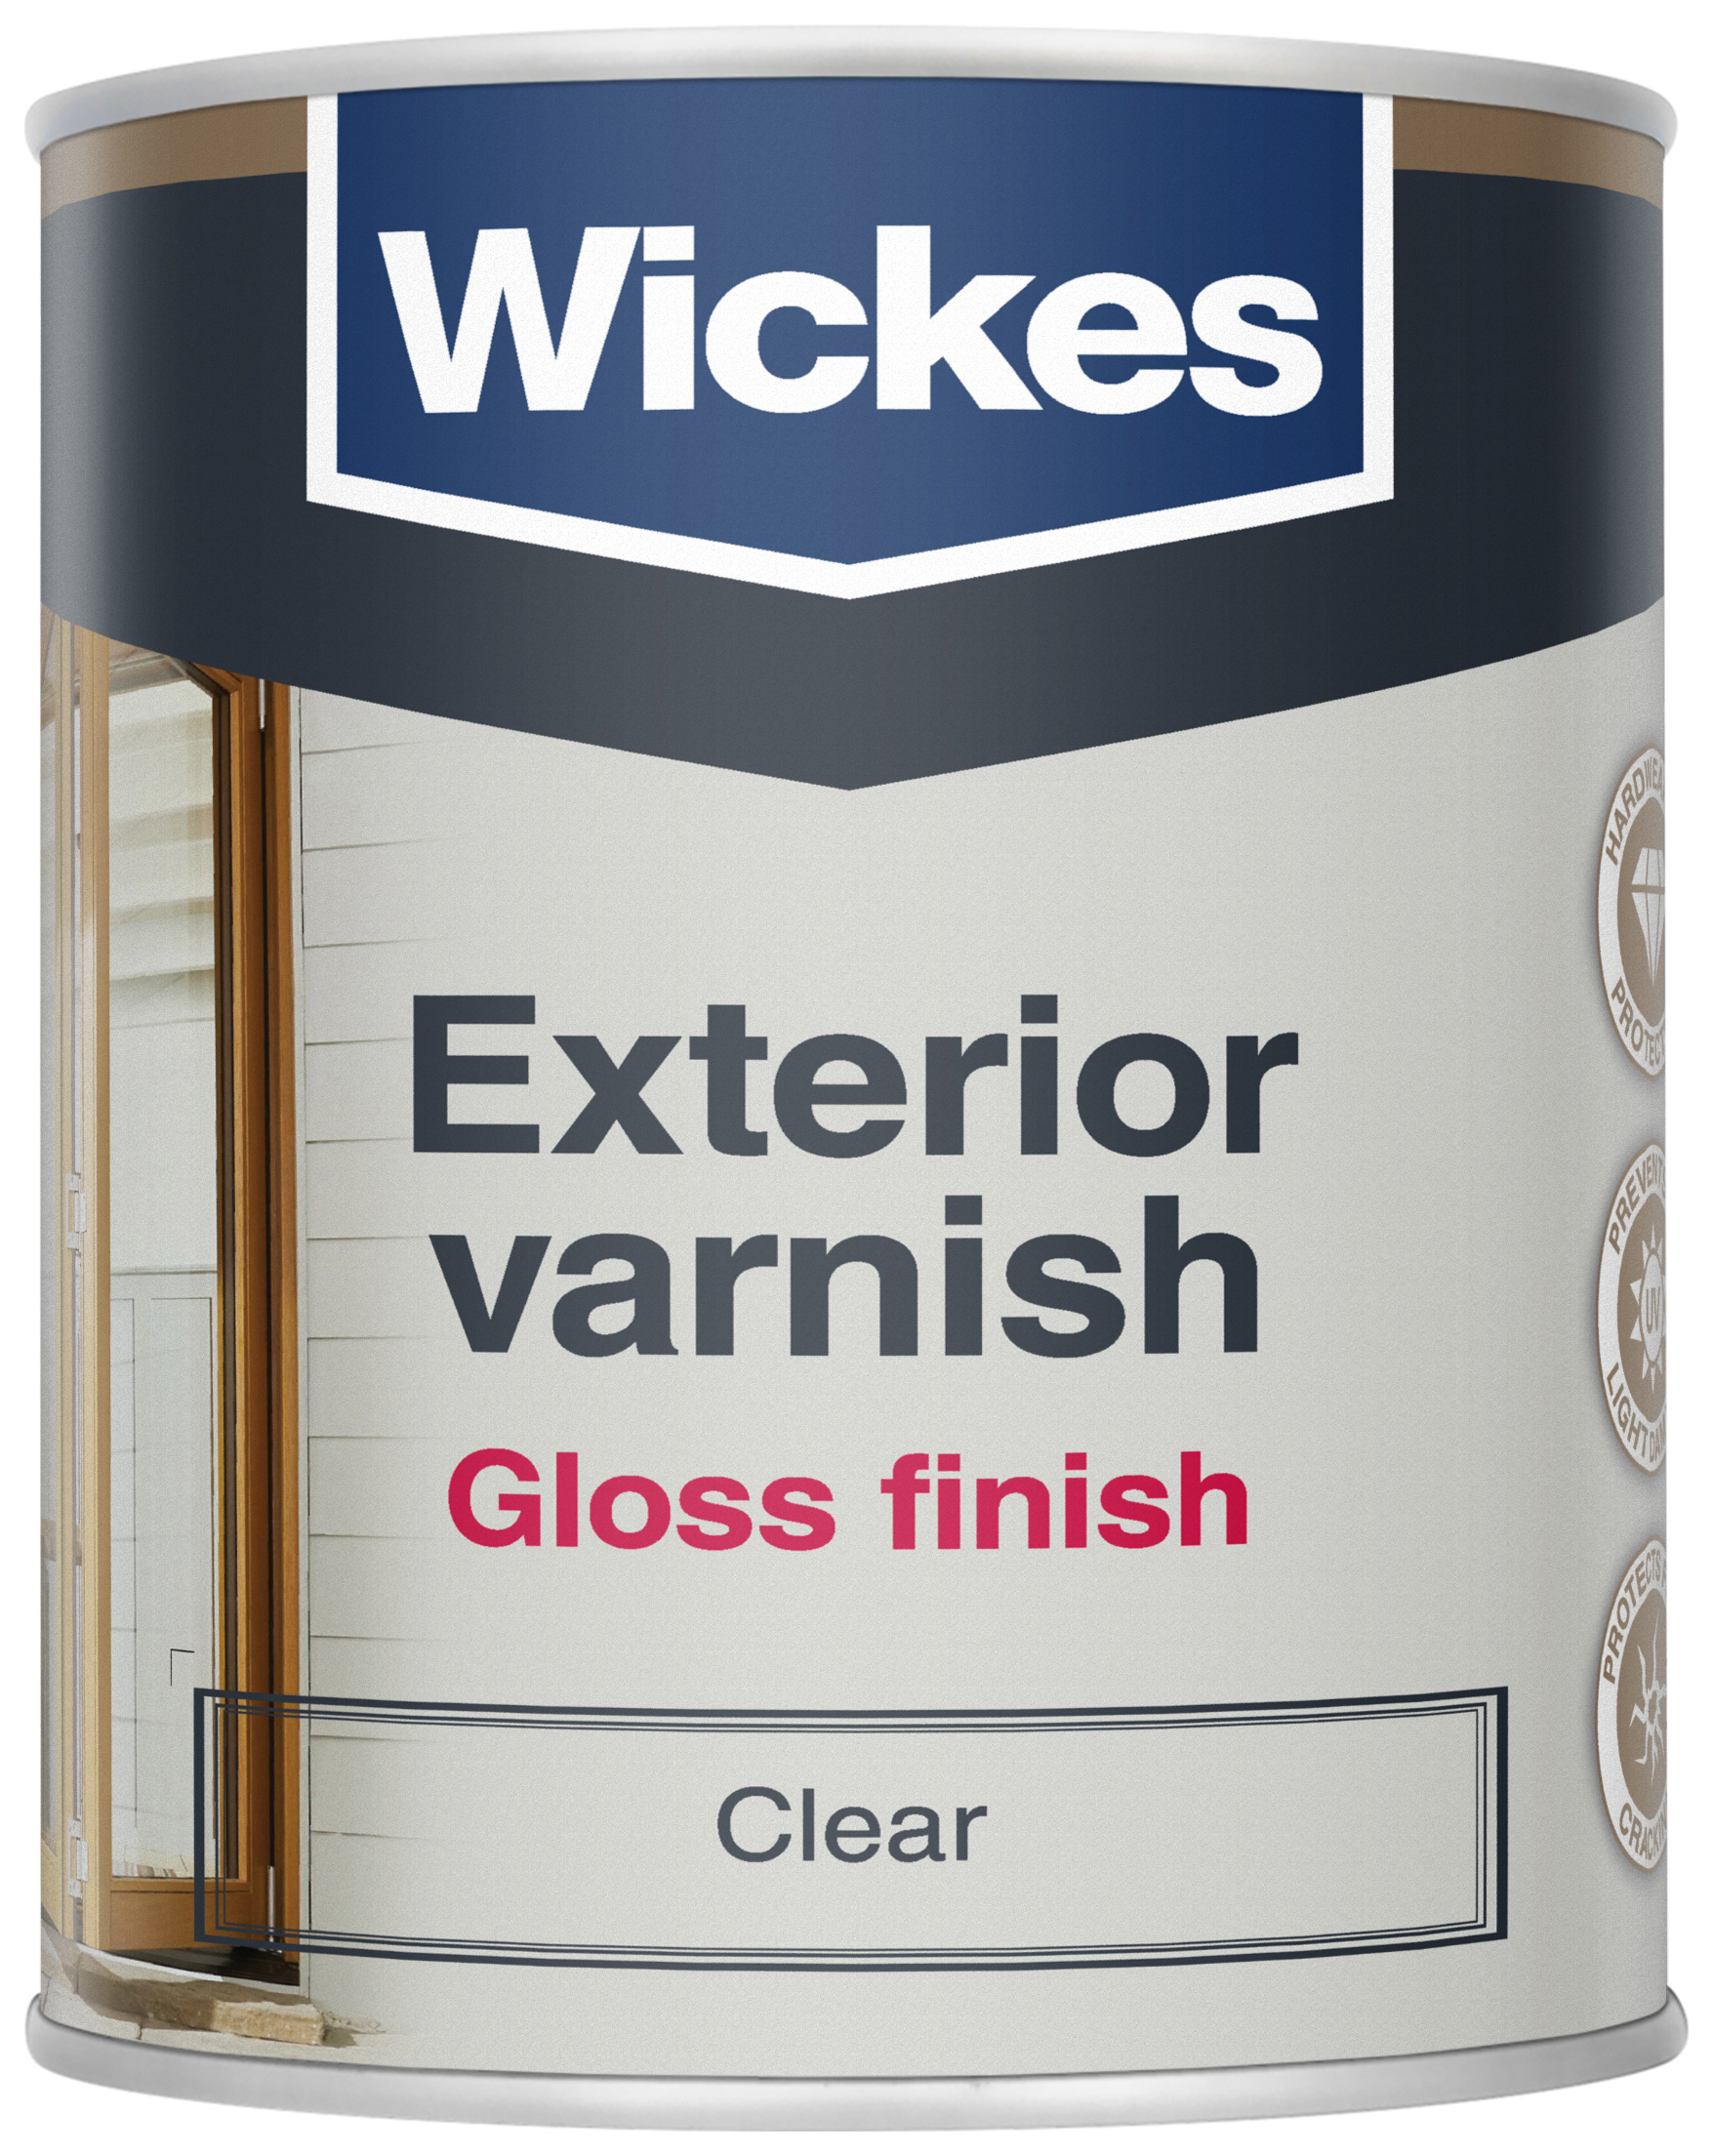 Image of Wickes Exterior Varnish - Clear Gloss 750ml